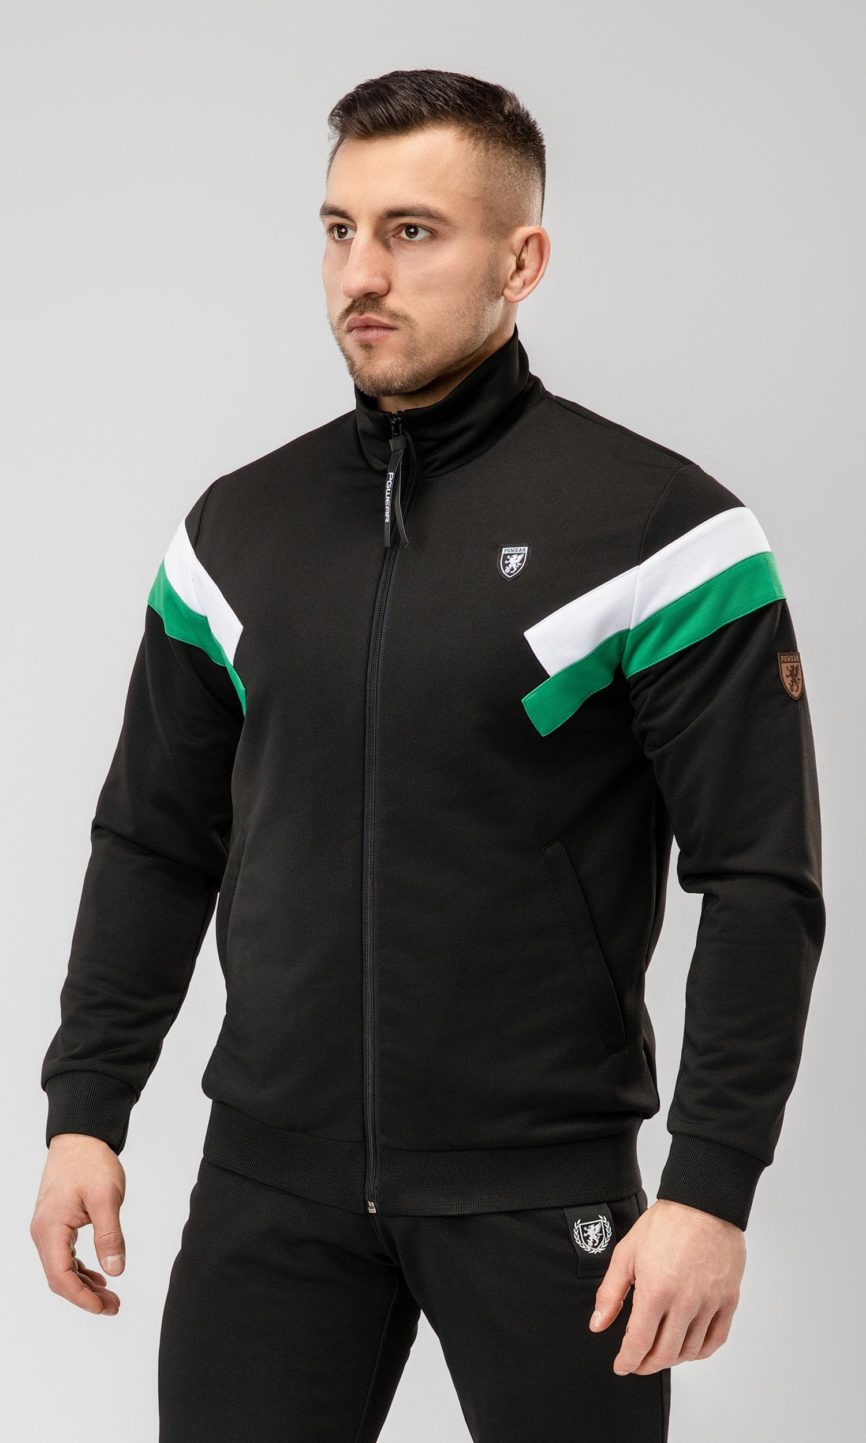 Track Top "Leader" Green/White